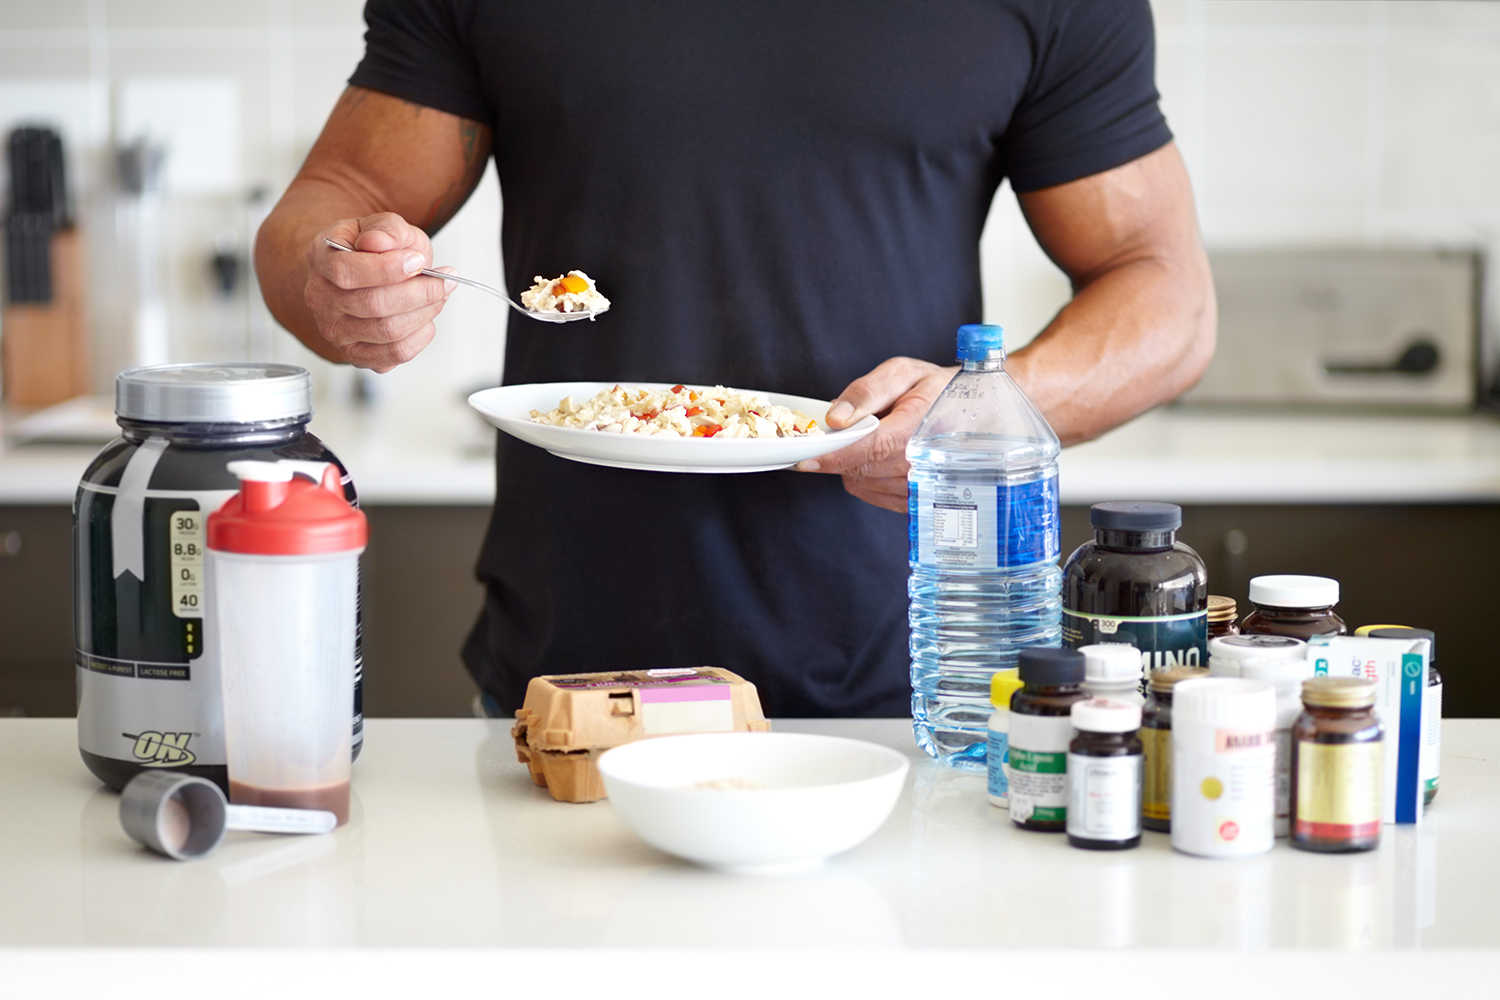 Nourishing pre-workout dishes